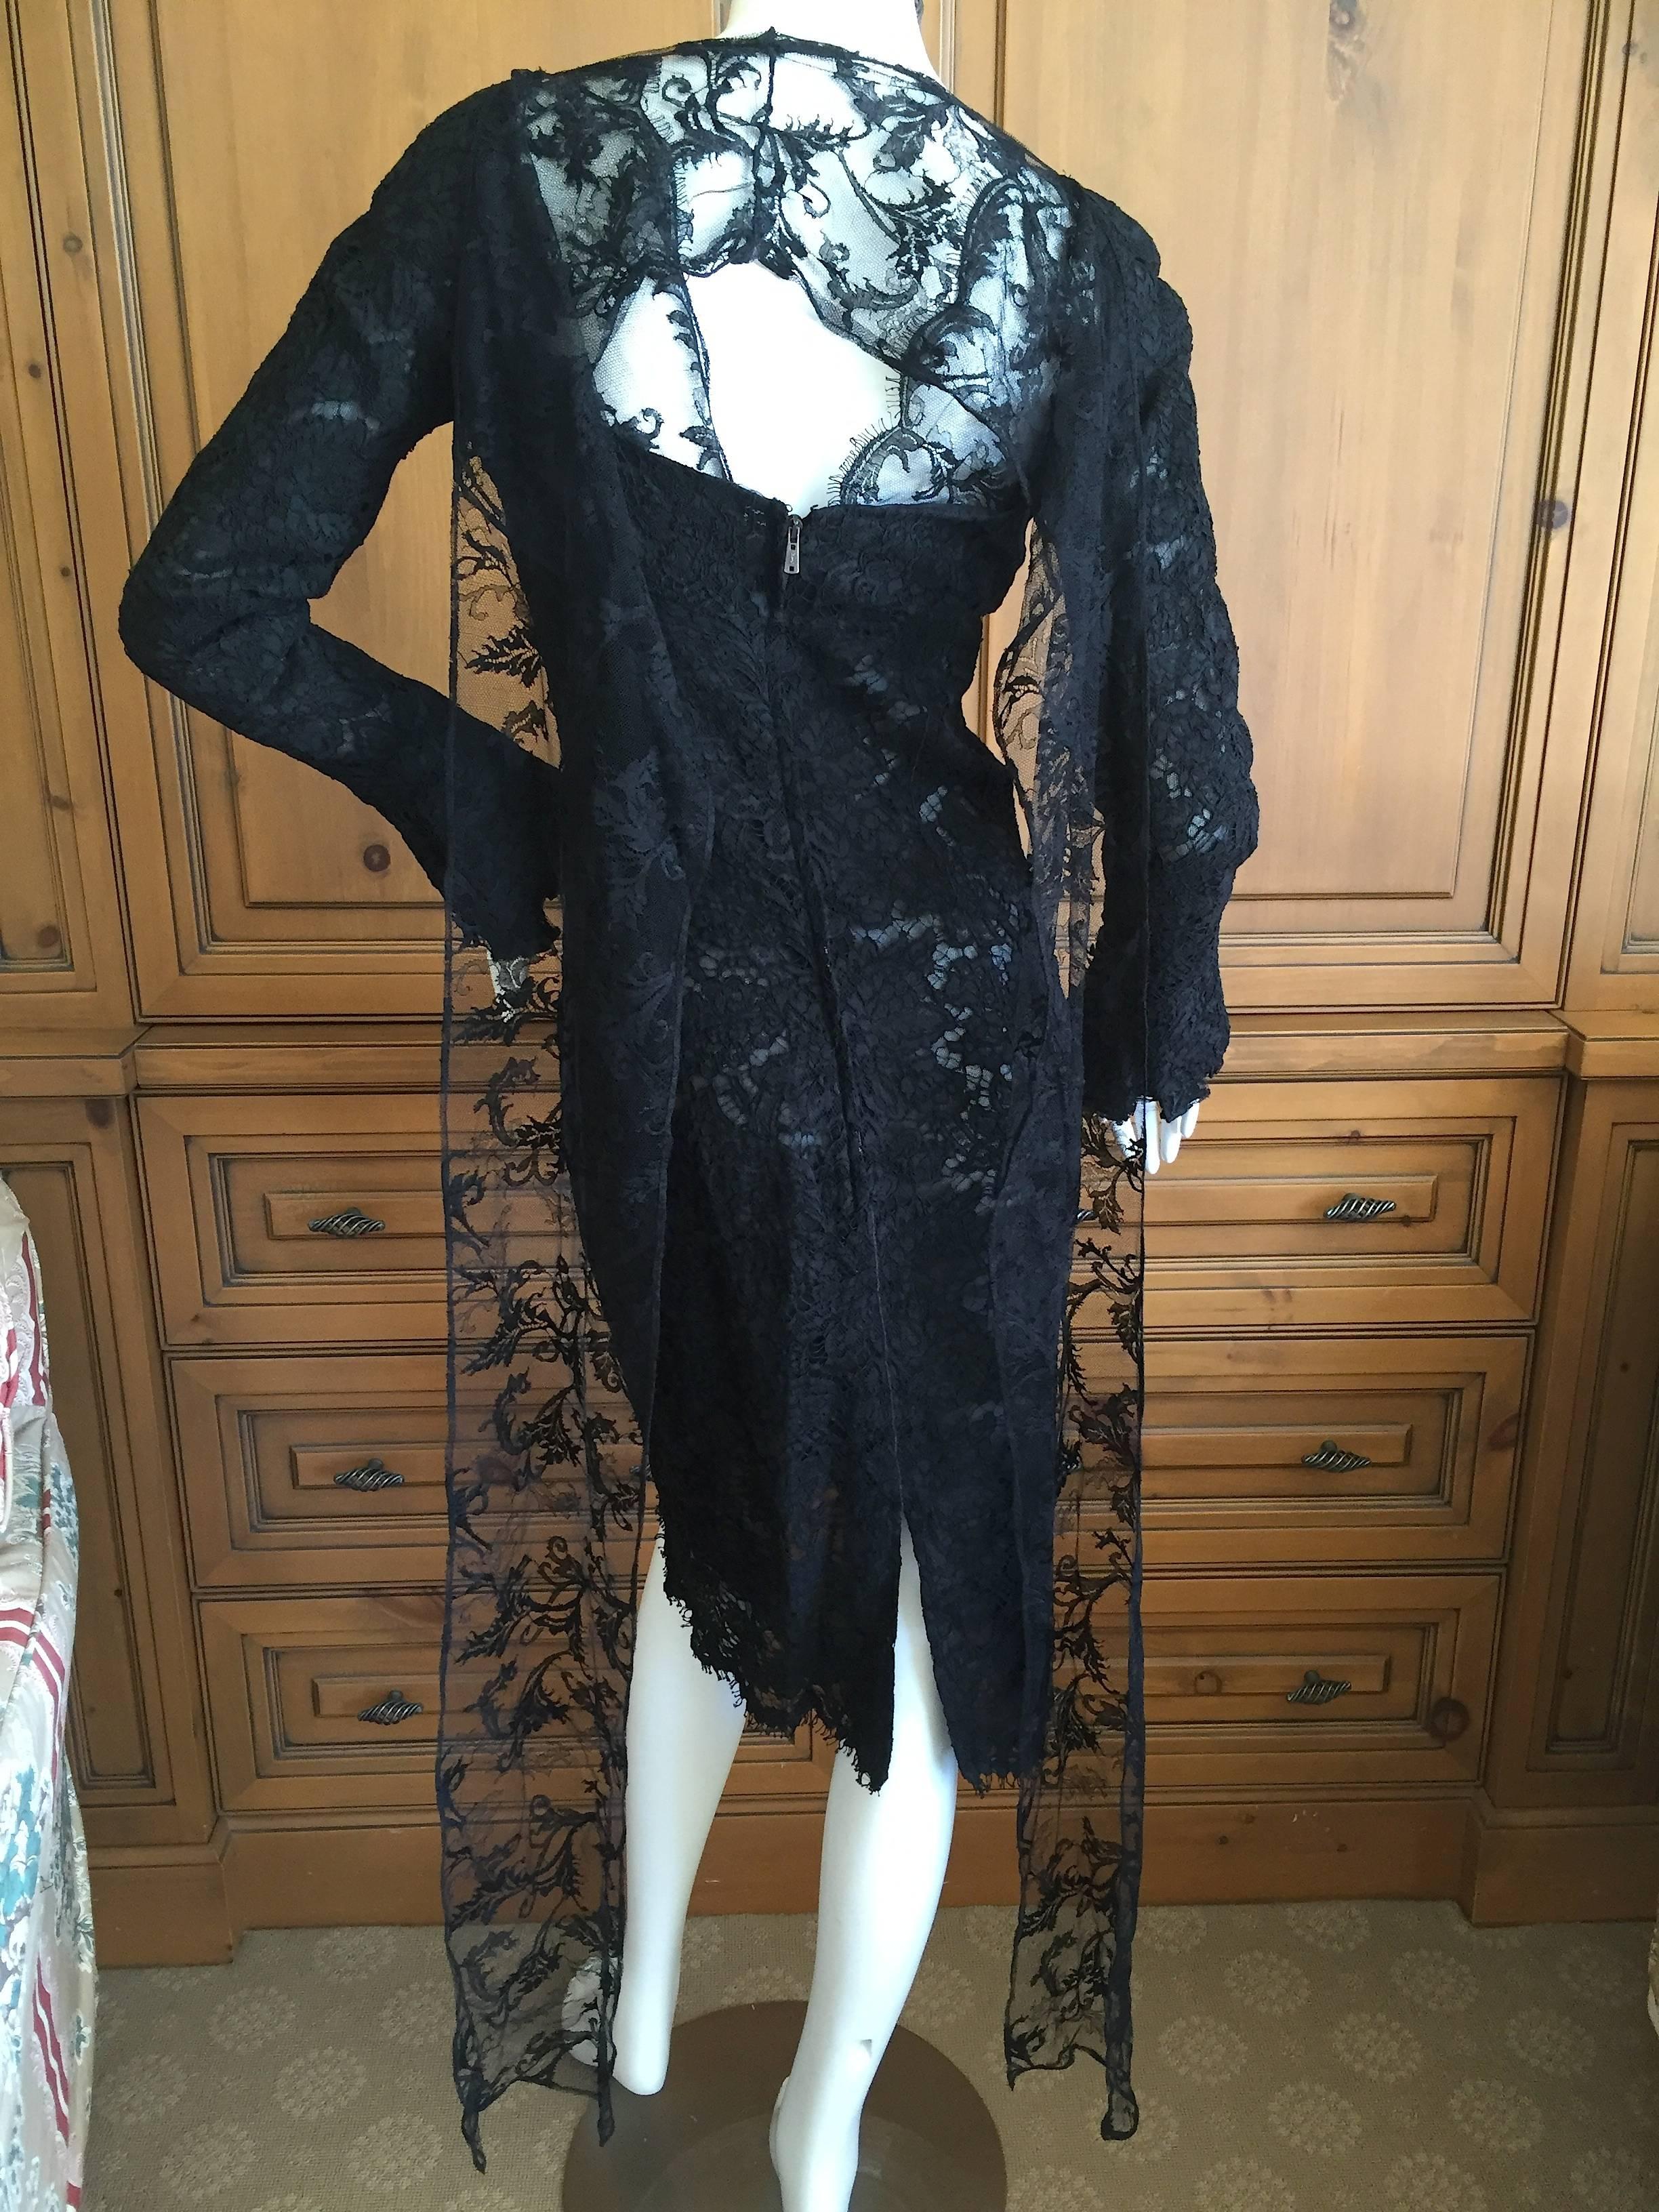 Women's Yves Saint Laurent by Tom Ford Black Lace Cocktail Dress with Scarf Ties For Sale